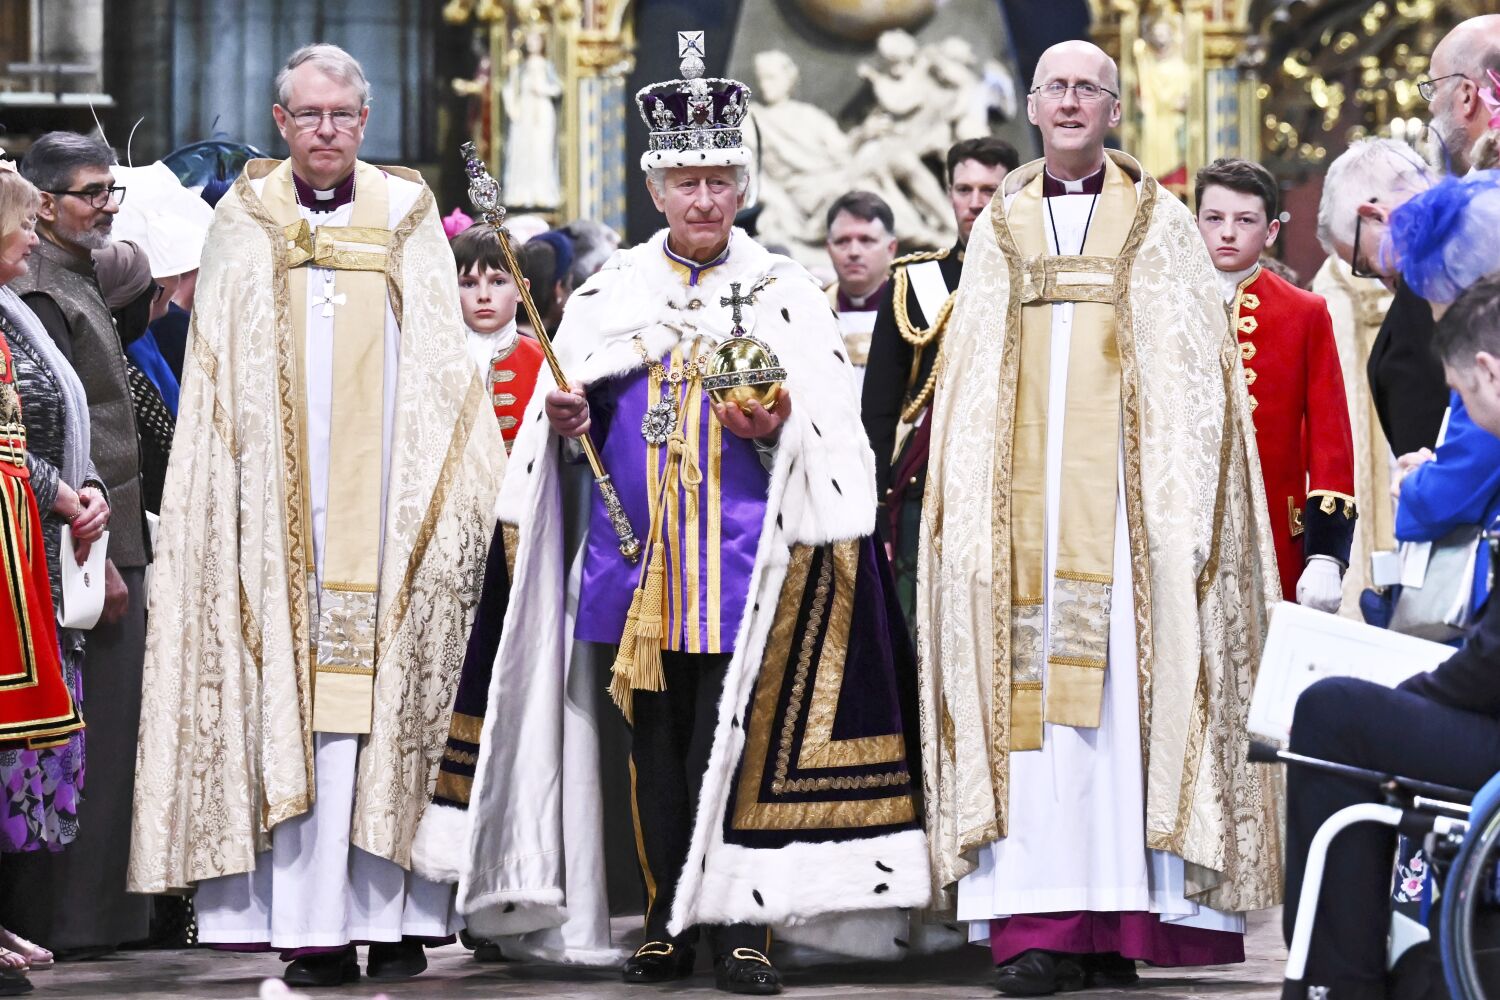 Photos: King Charles III coronation culminates seven-decade journey from heir to monarch